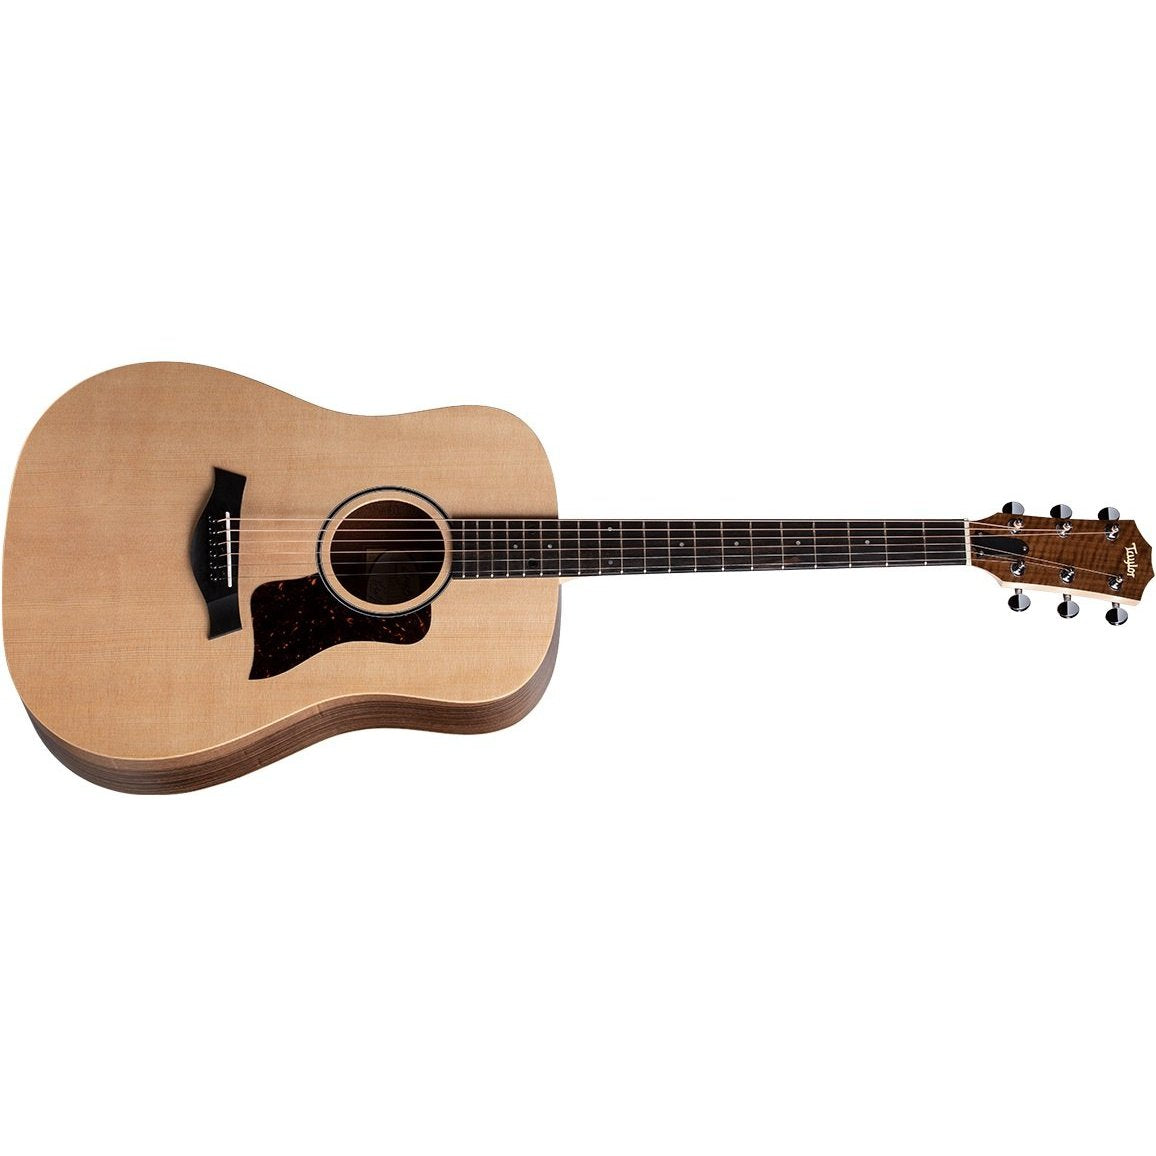 Taylor BBT Big Baby Acoustic Guitar-Natural with Gig Bag-Music World Academy